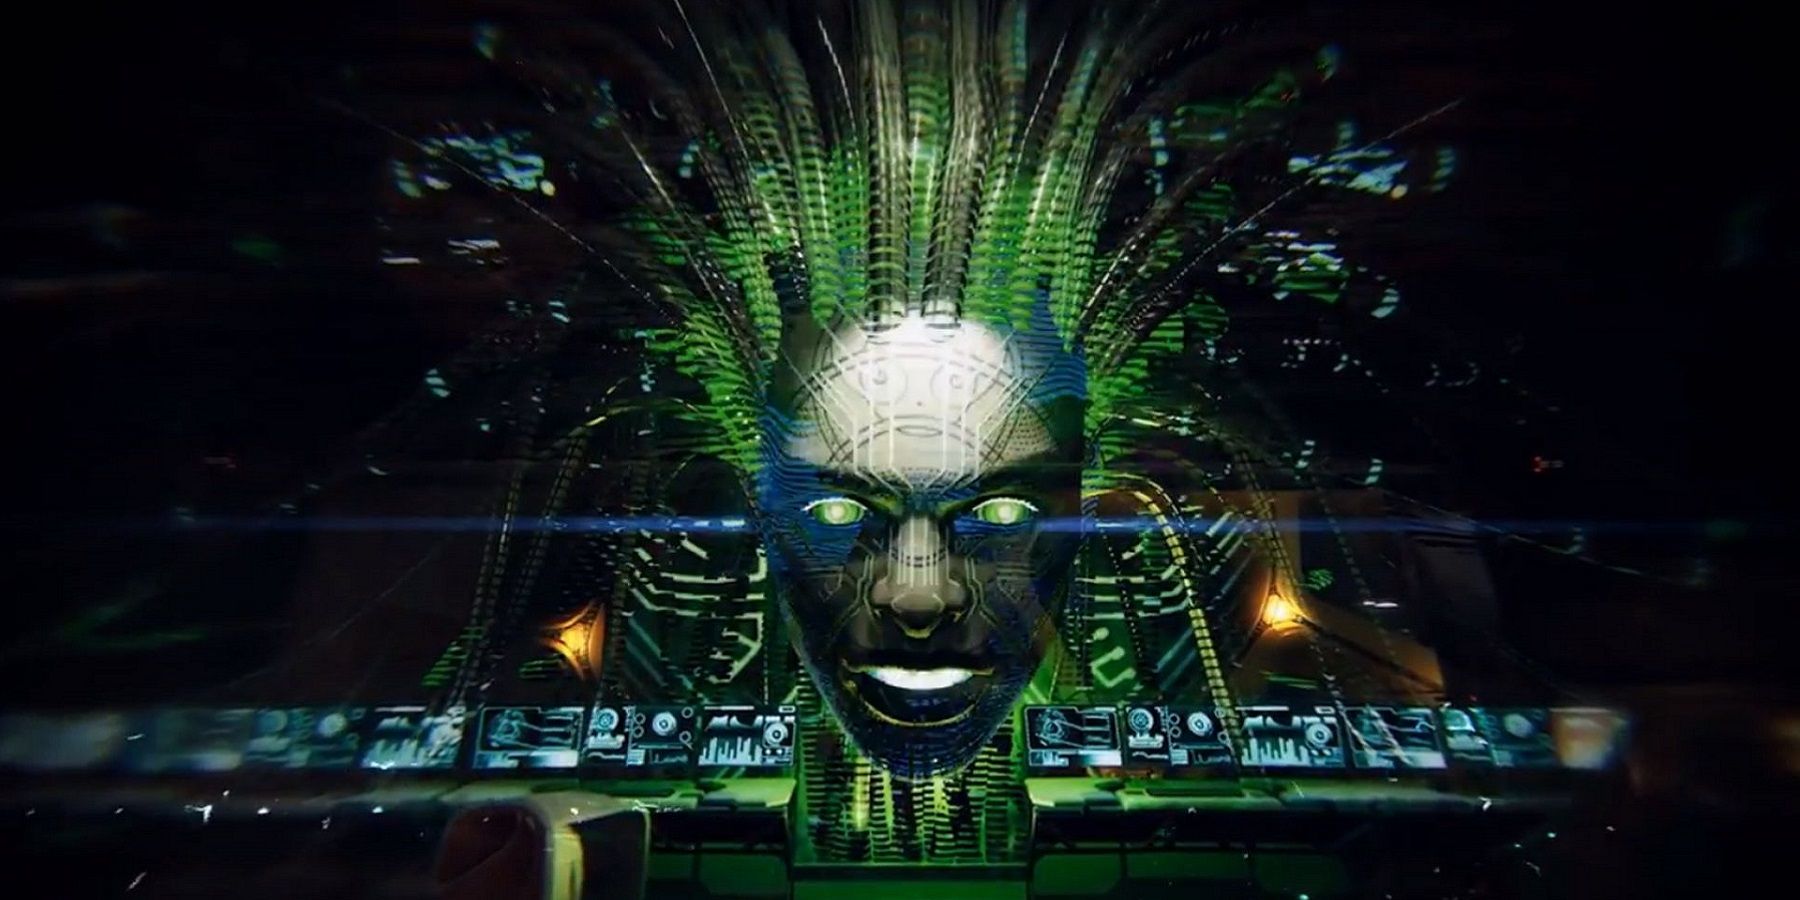 An image from the System Shock remake showing the infamous SHODAN AI.